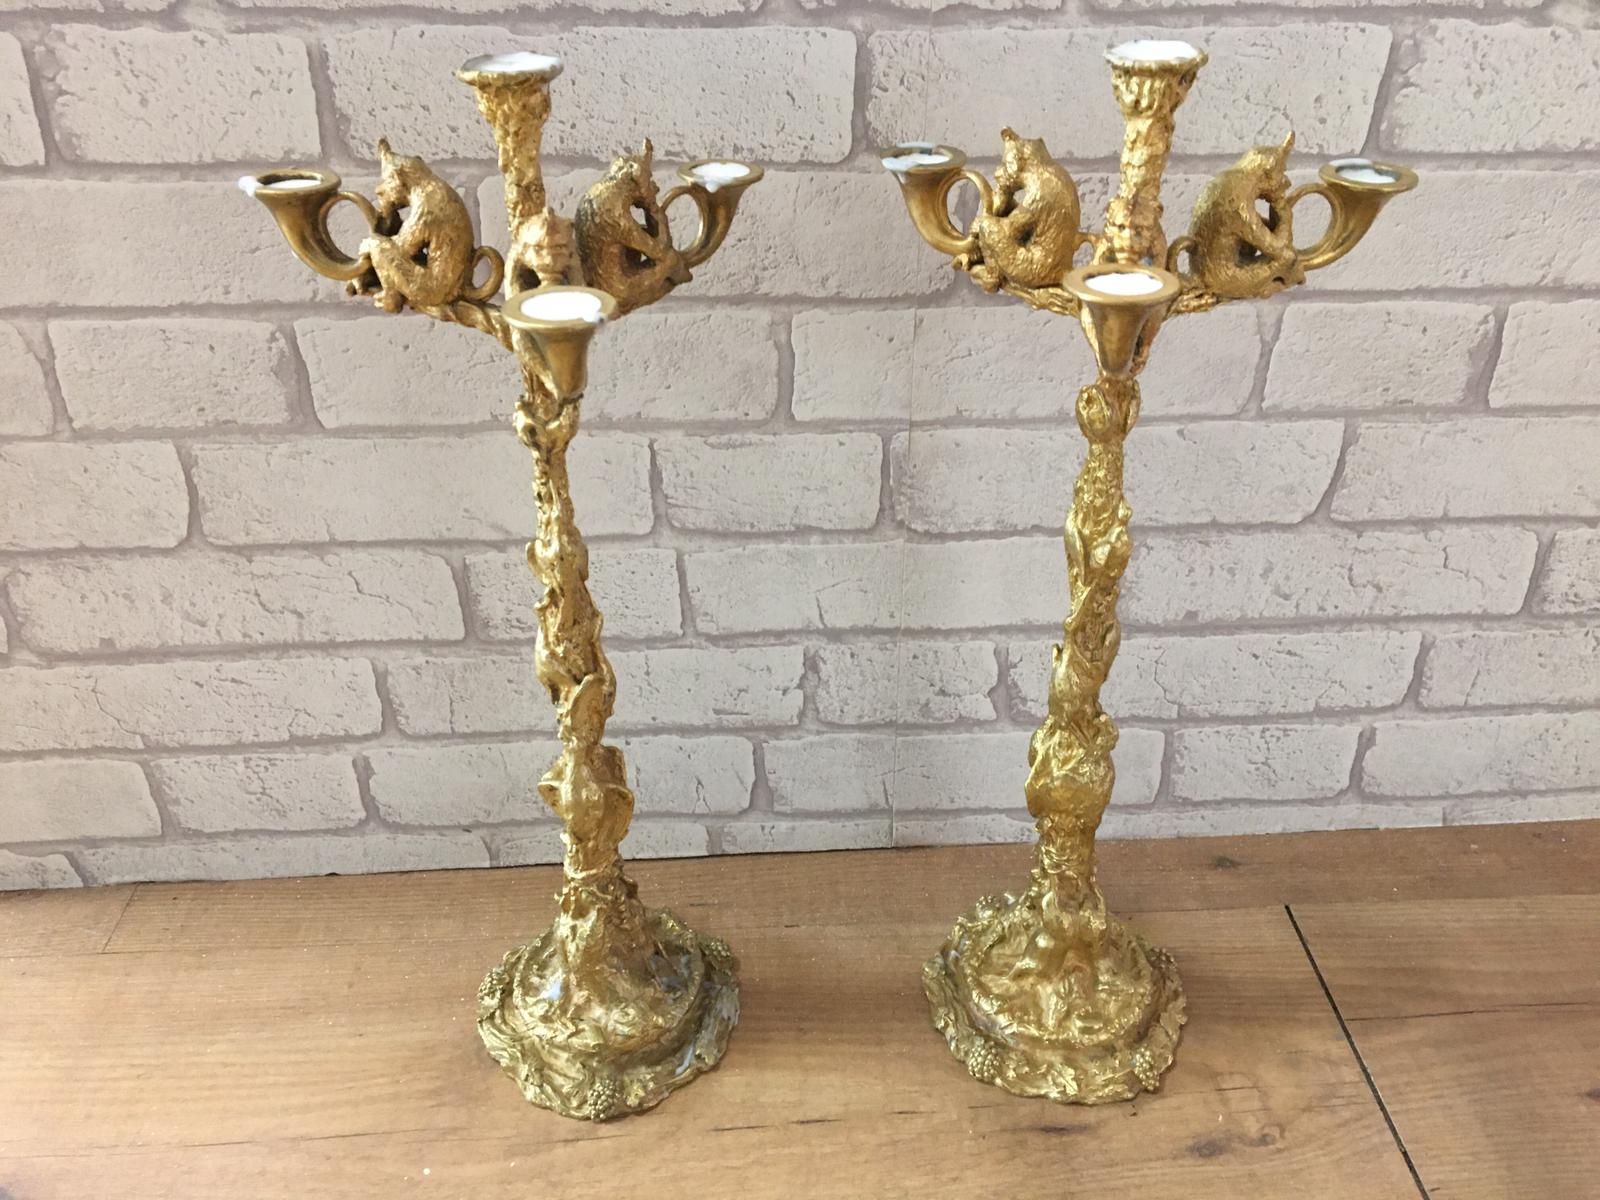 Pair of gilt bronze Fratin c1820 candleabra, the base with hunting weapons and swords, the sticks